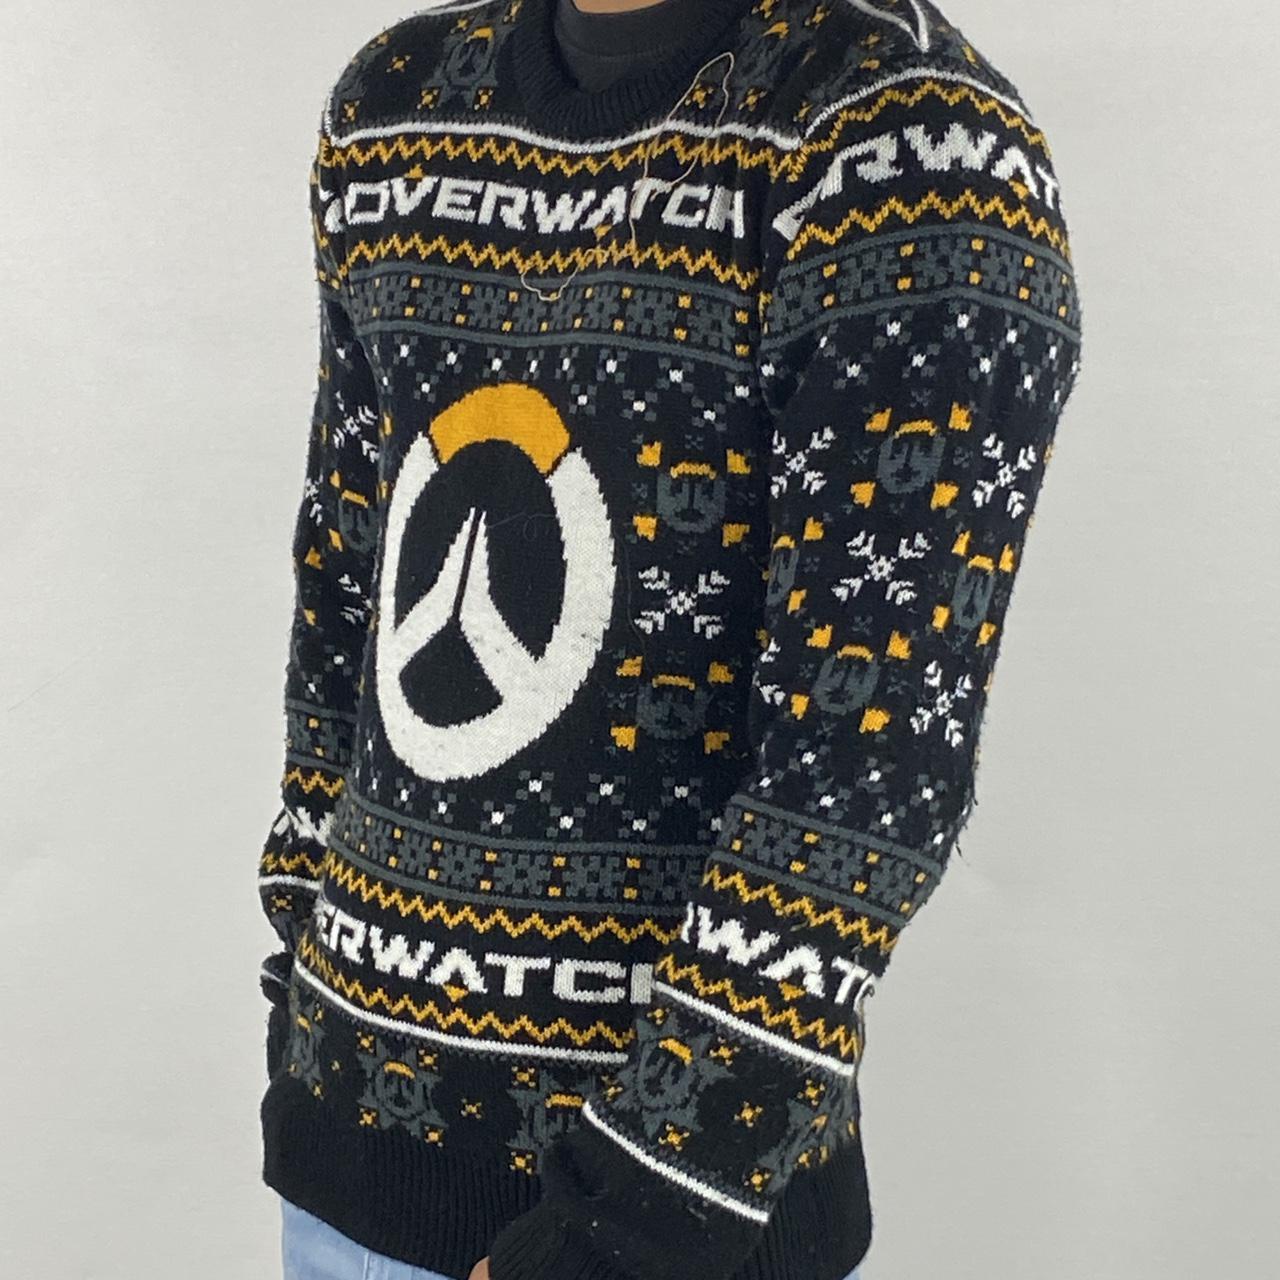 Product Image 1 - Slick Overwatch game Christmas sweater,